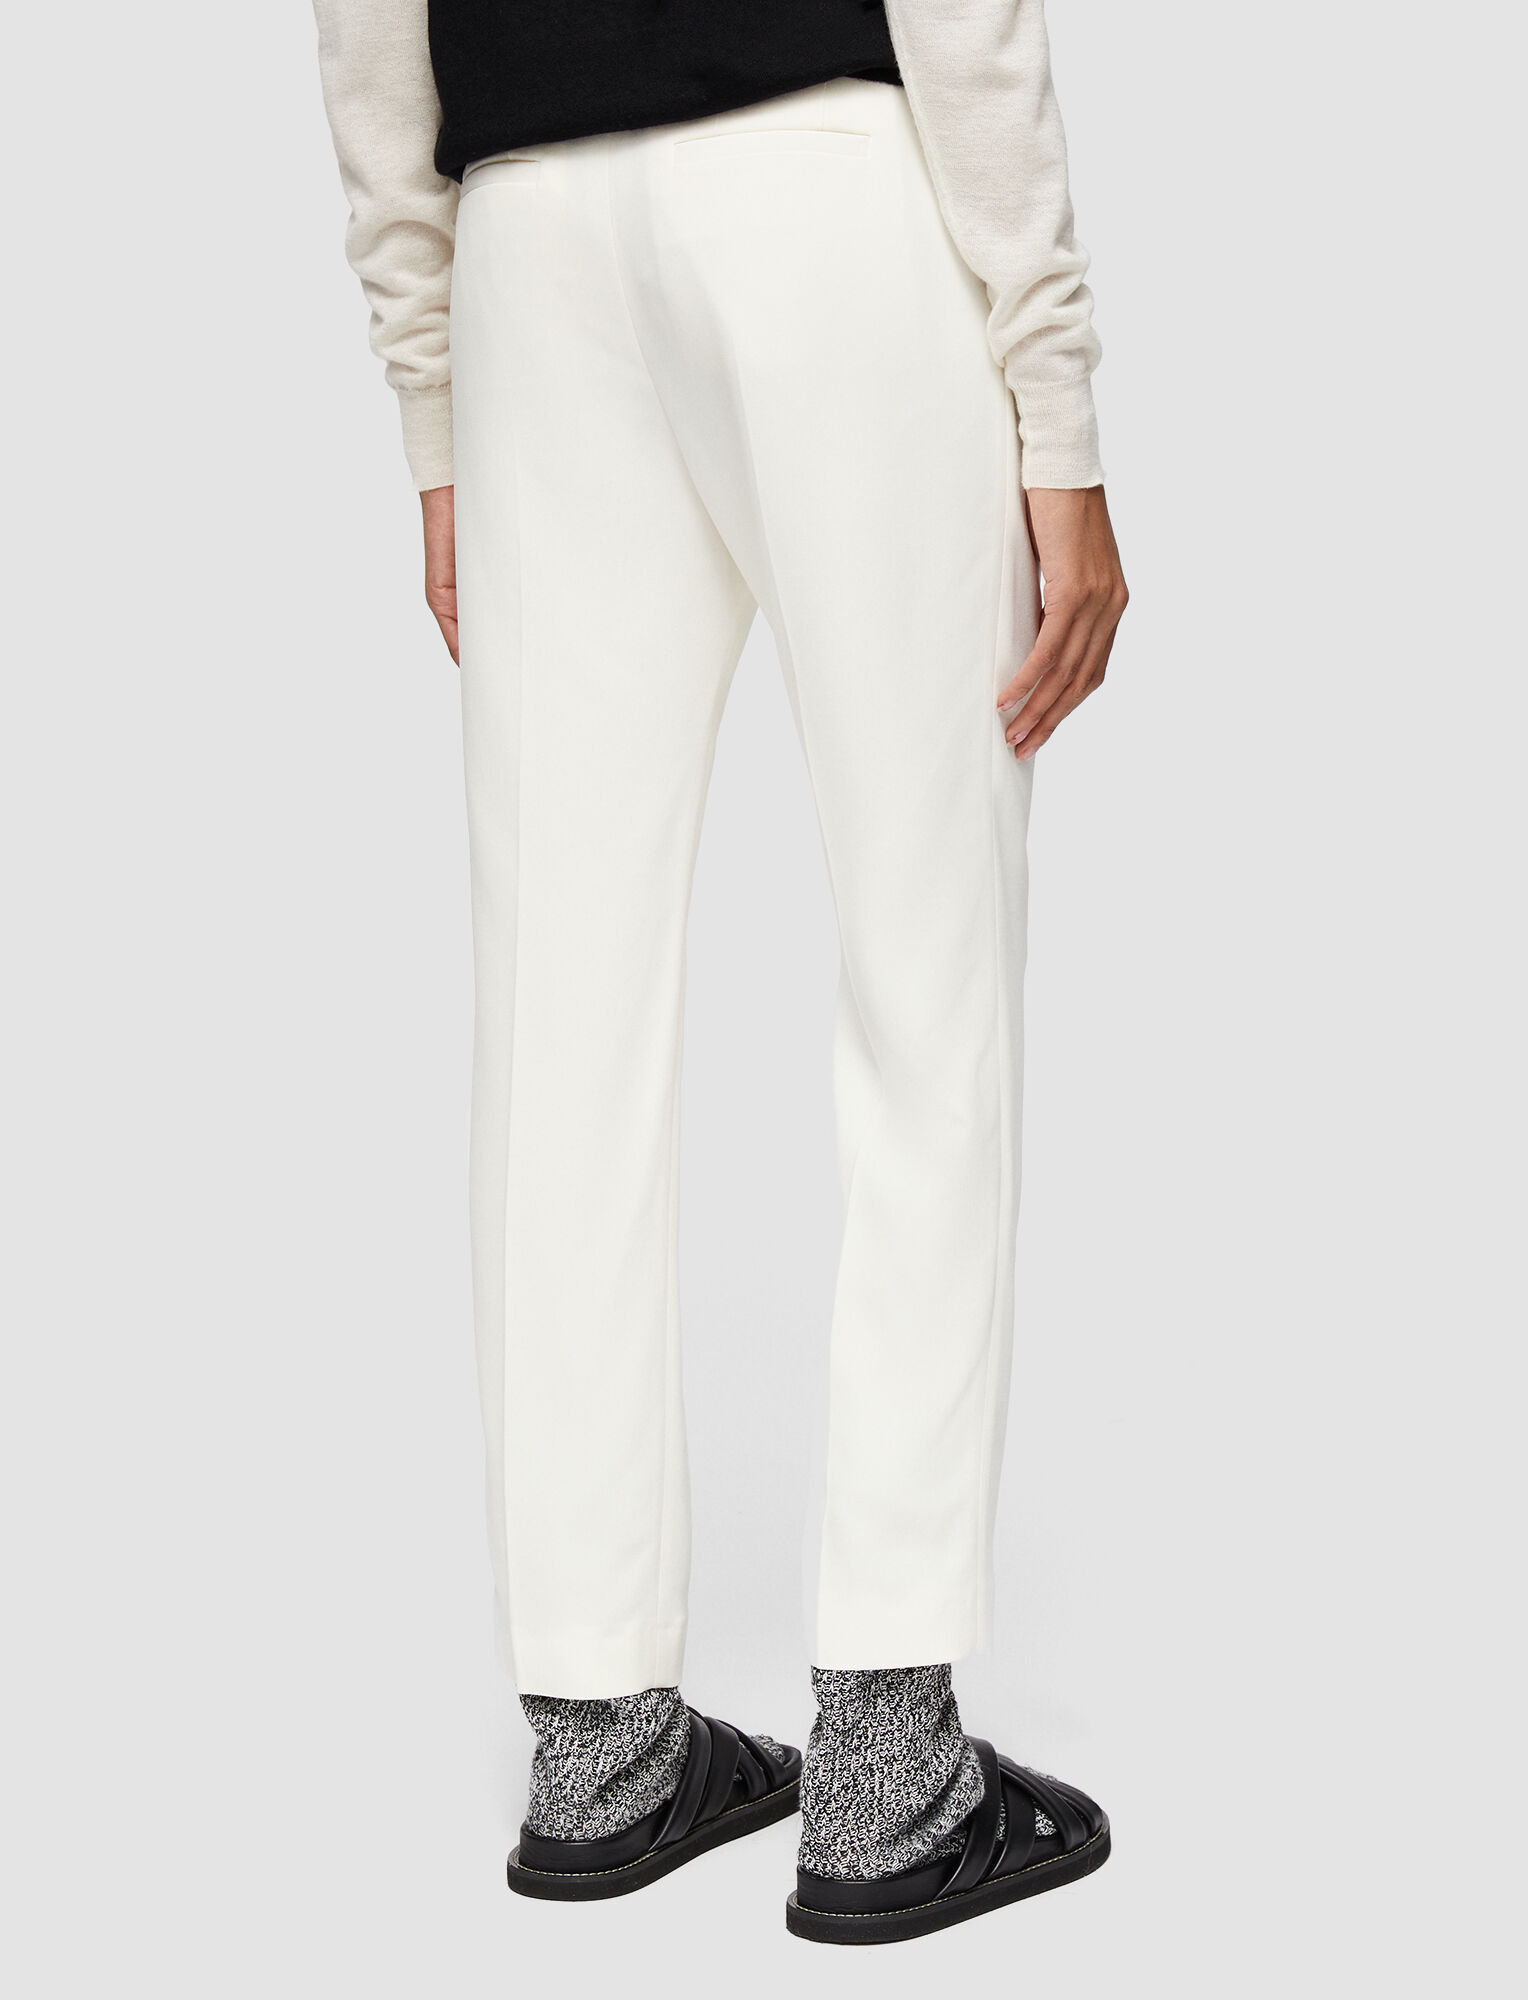 Joseph, Comfort Cady Coleman Trousers, in Ivory